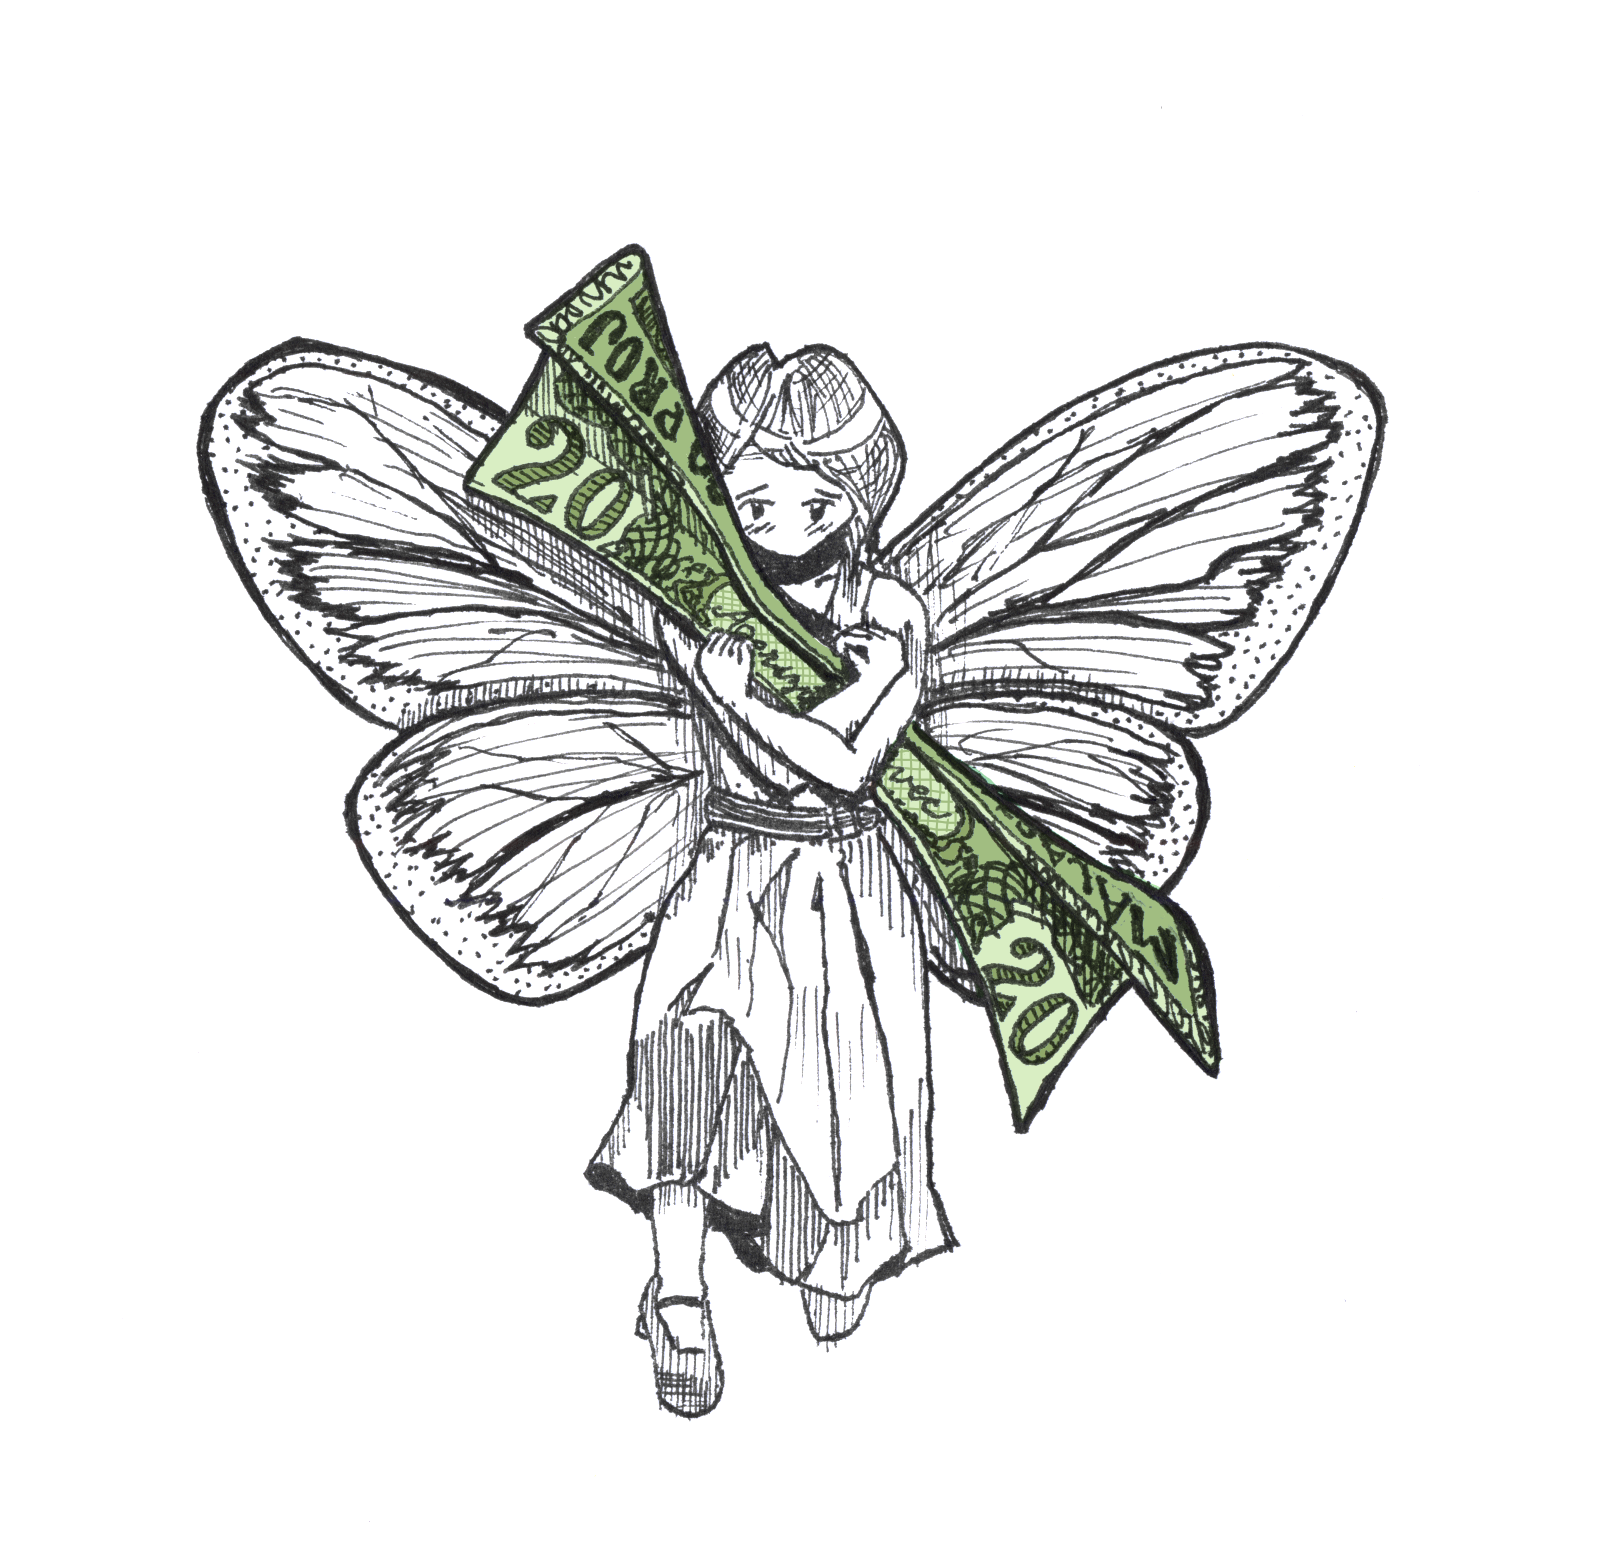 A picture of a faerie holding a 20 Proj banknote